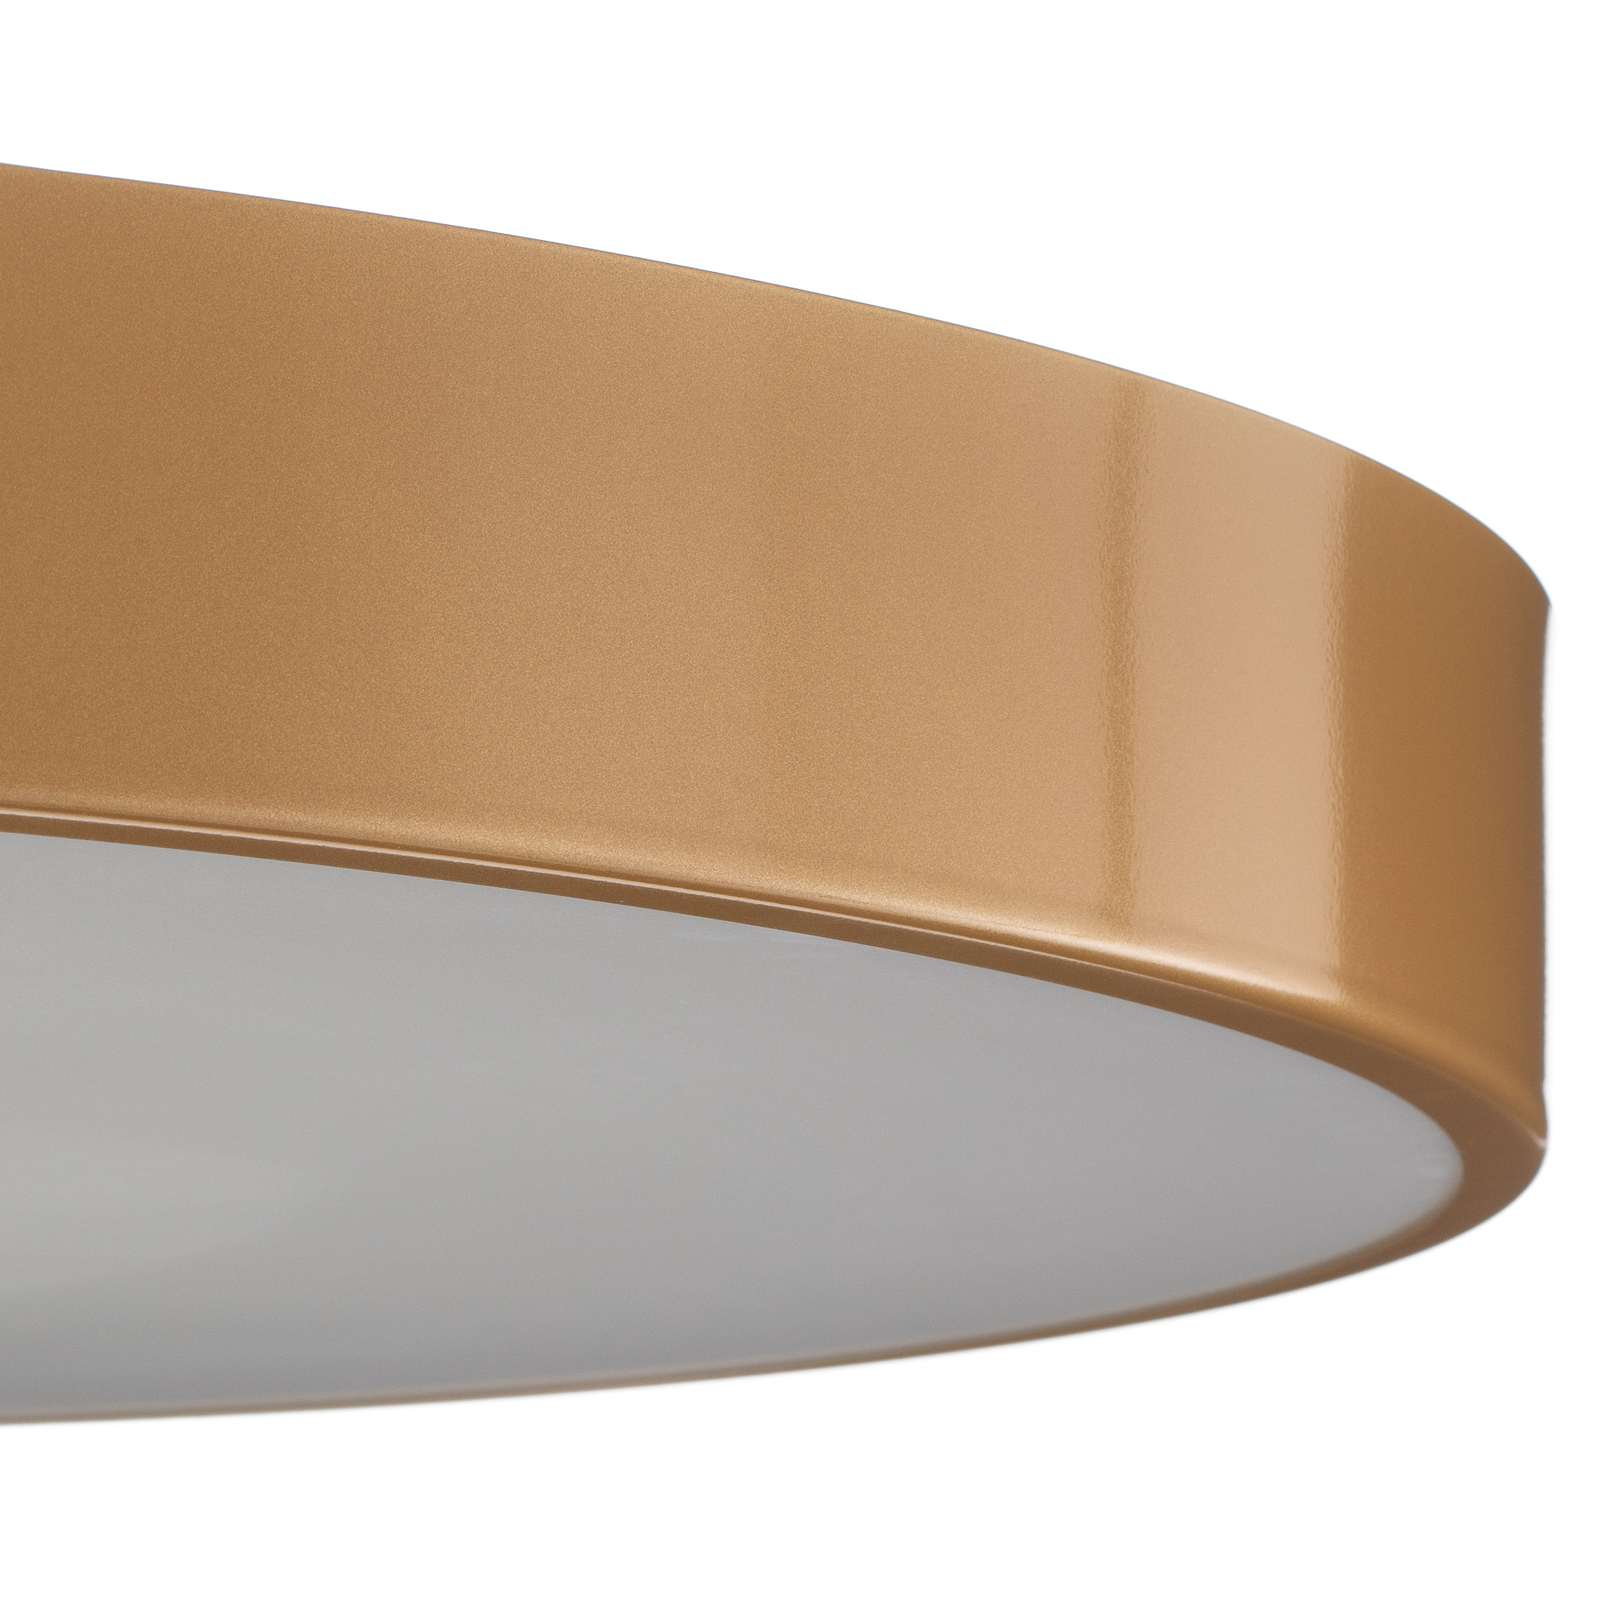 Cleo ceiling light in gold with diffuser, Ø 78 cm